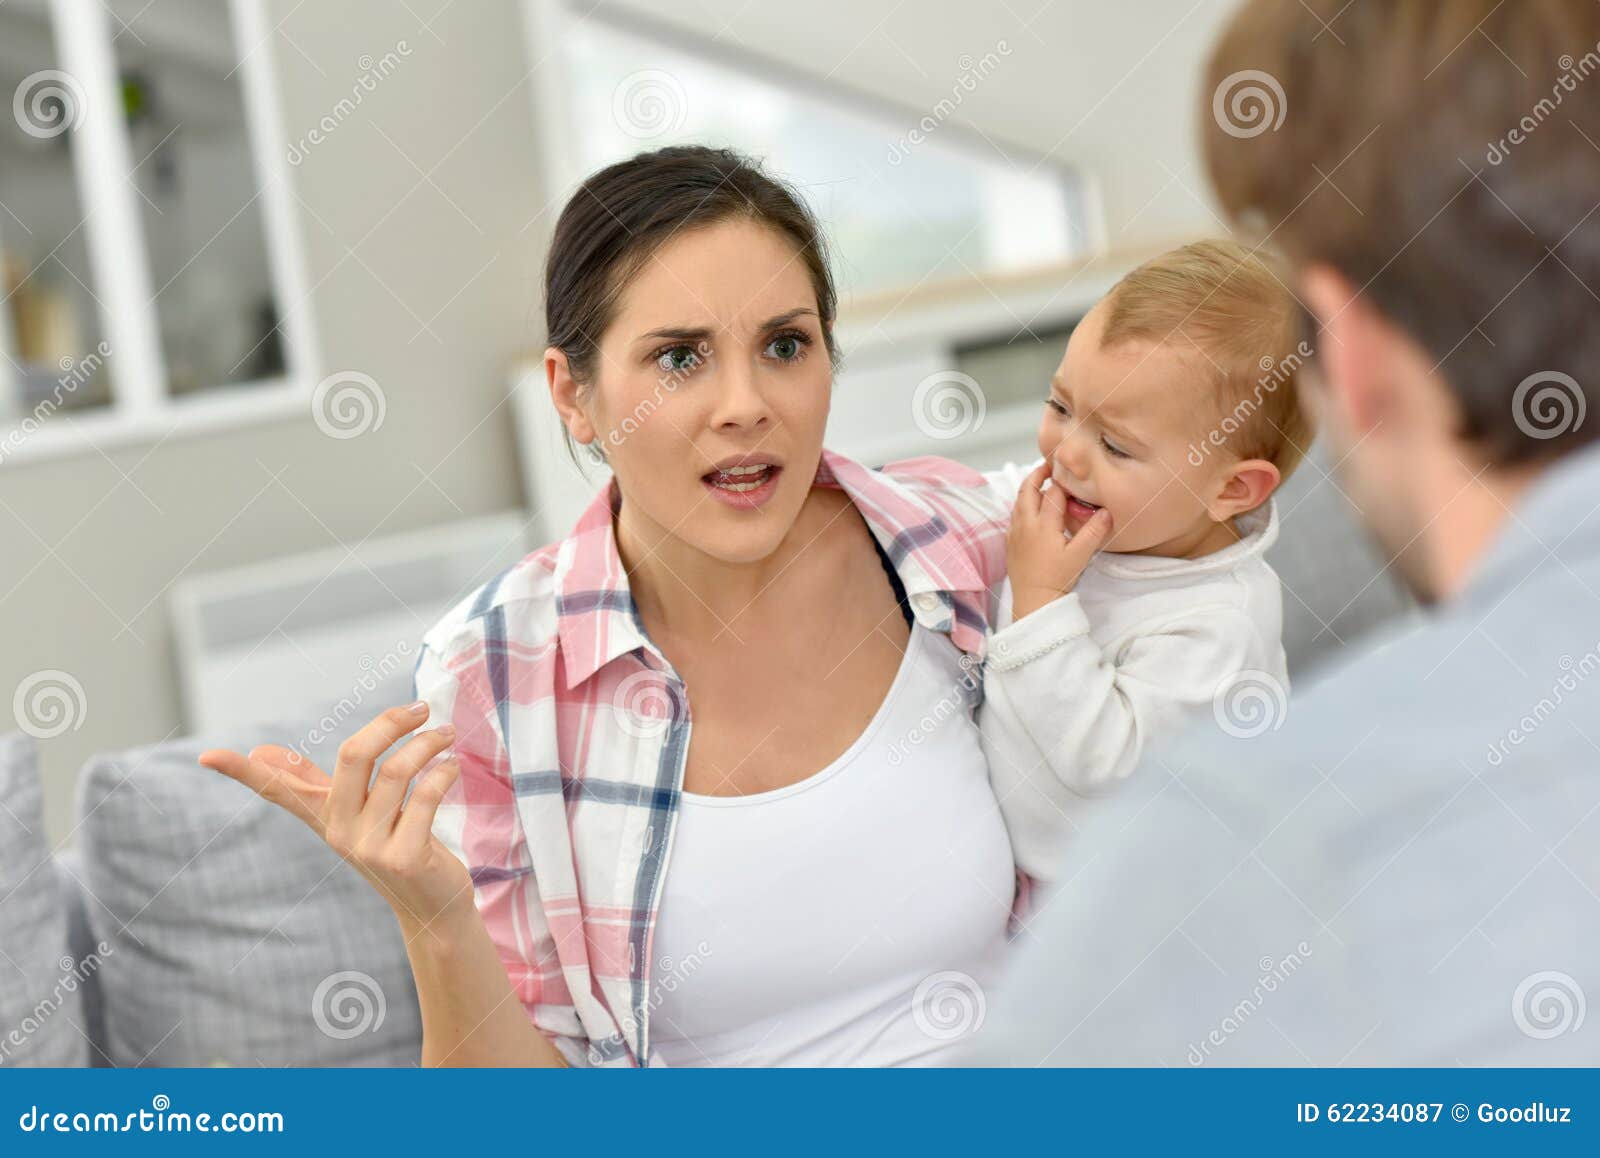 parents arguing in front of baby